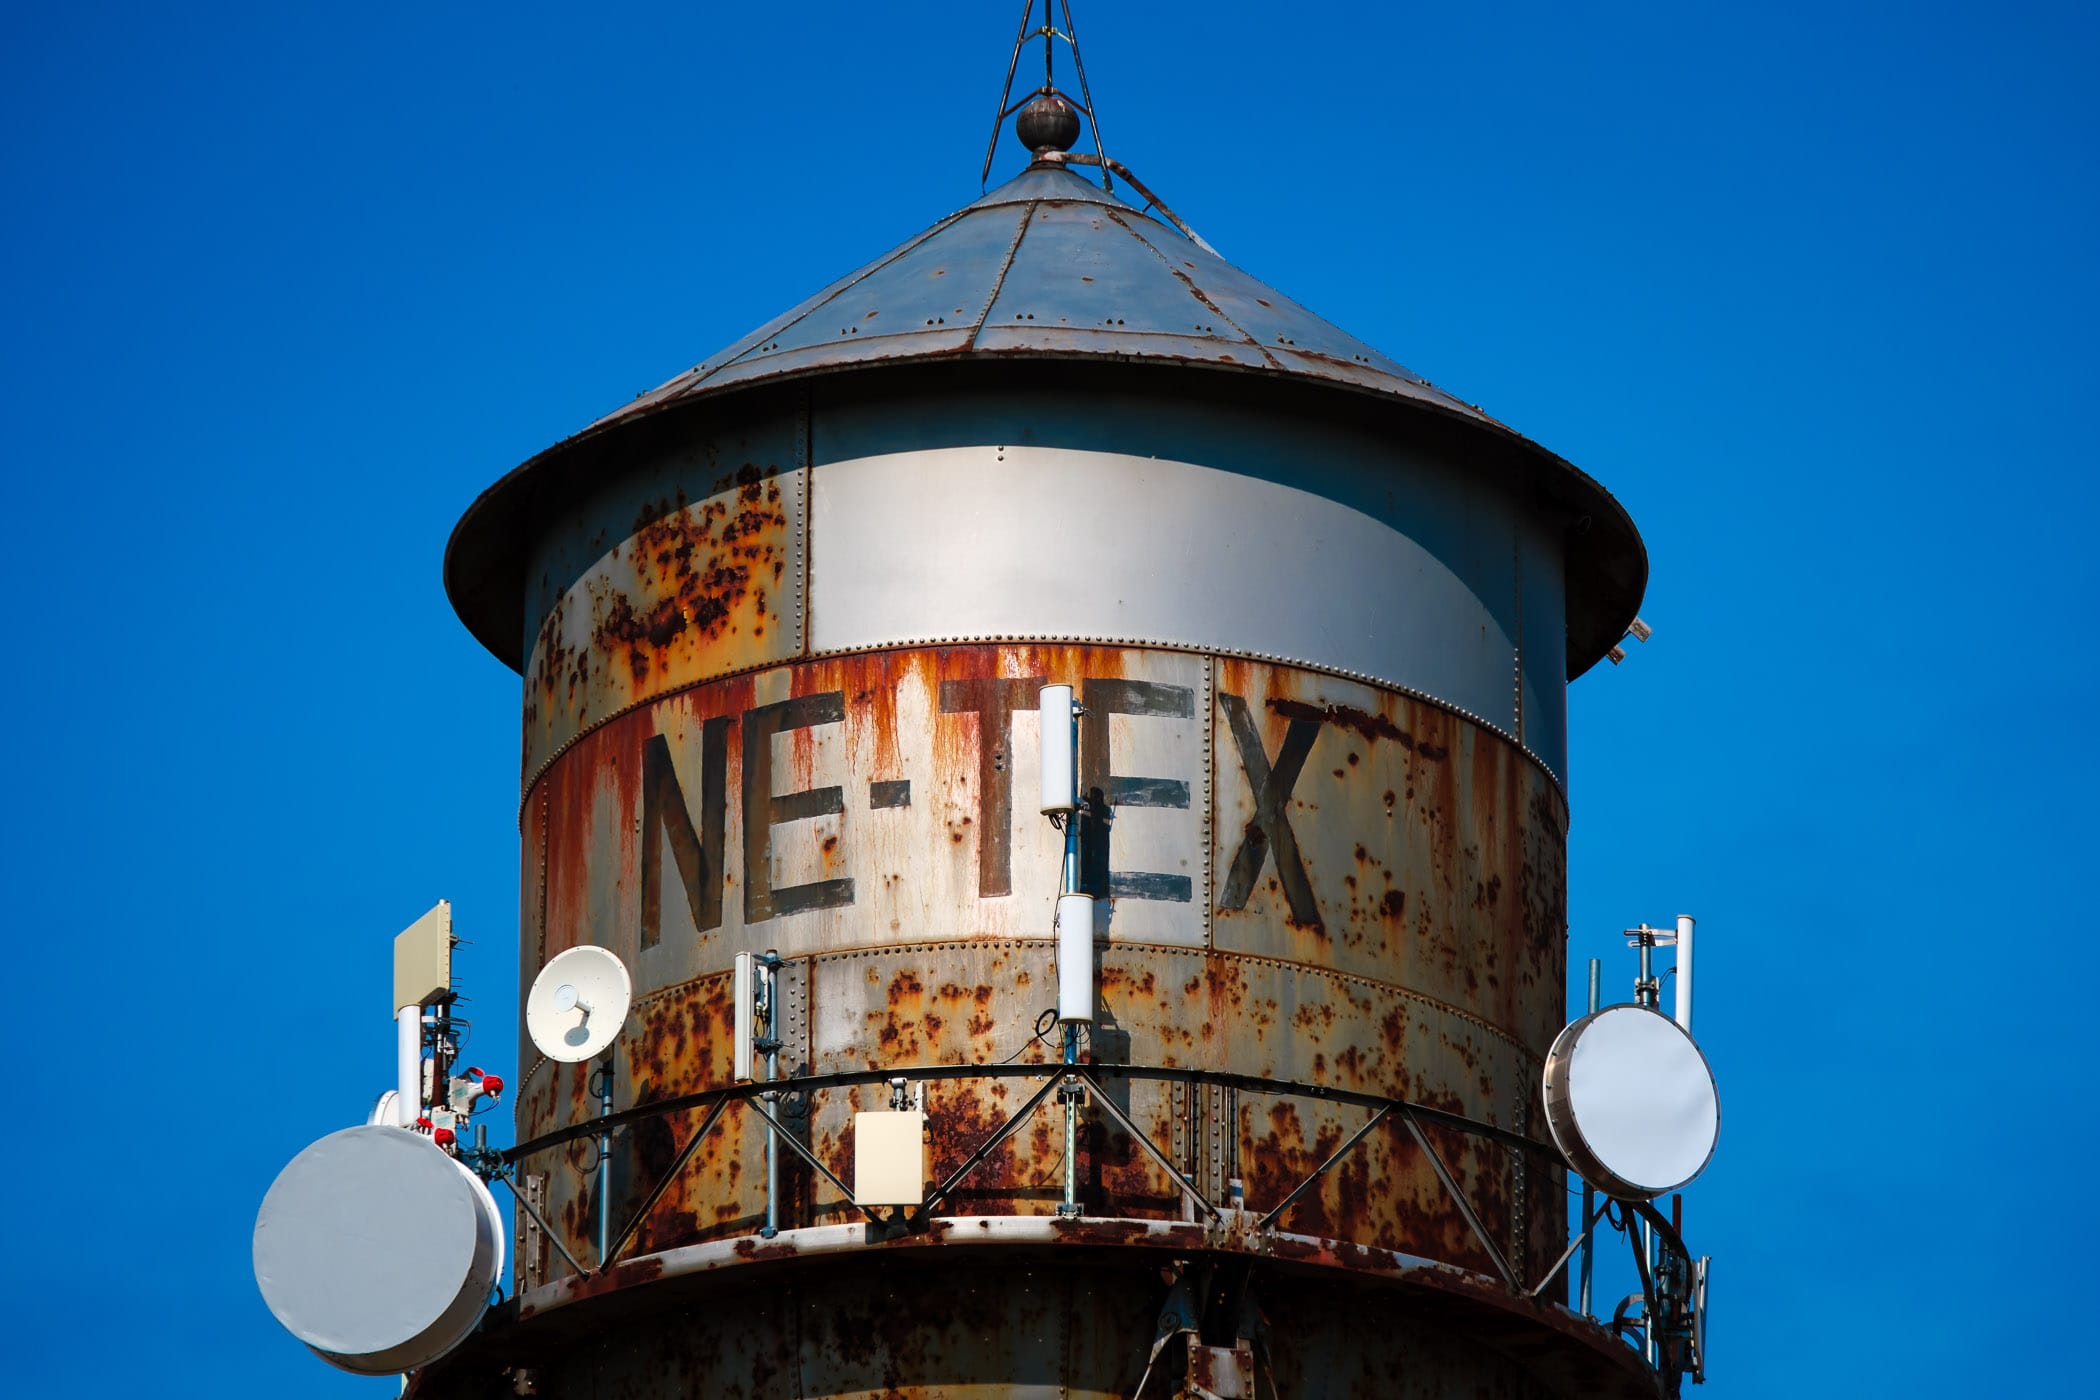 Cellular transmitters on a rusty water tower in Wolfe City, Texas.